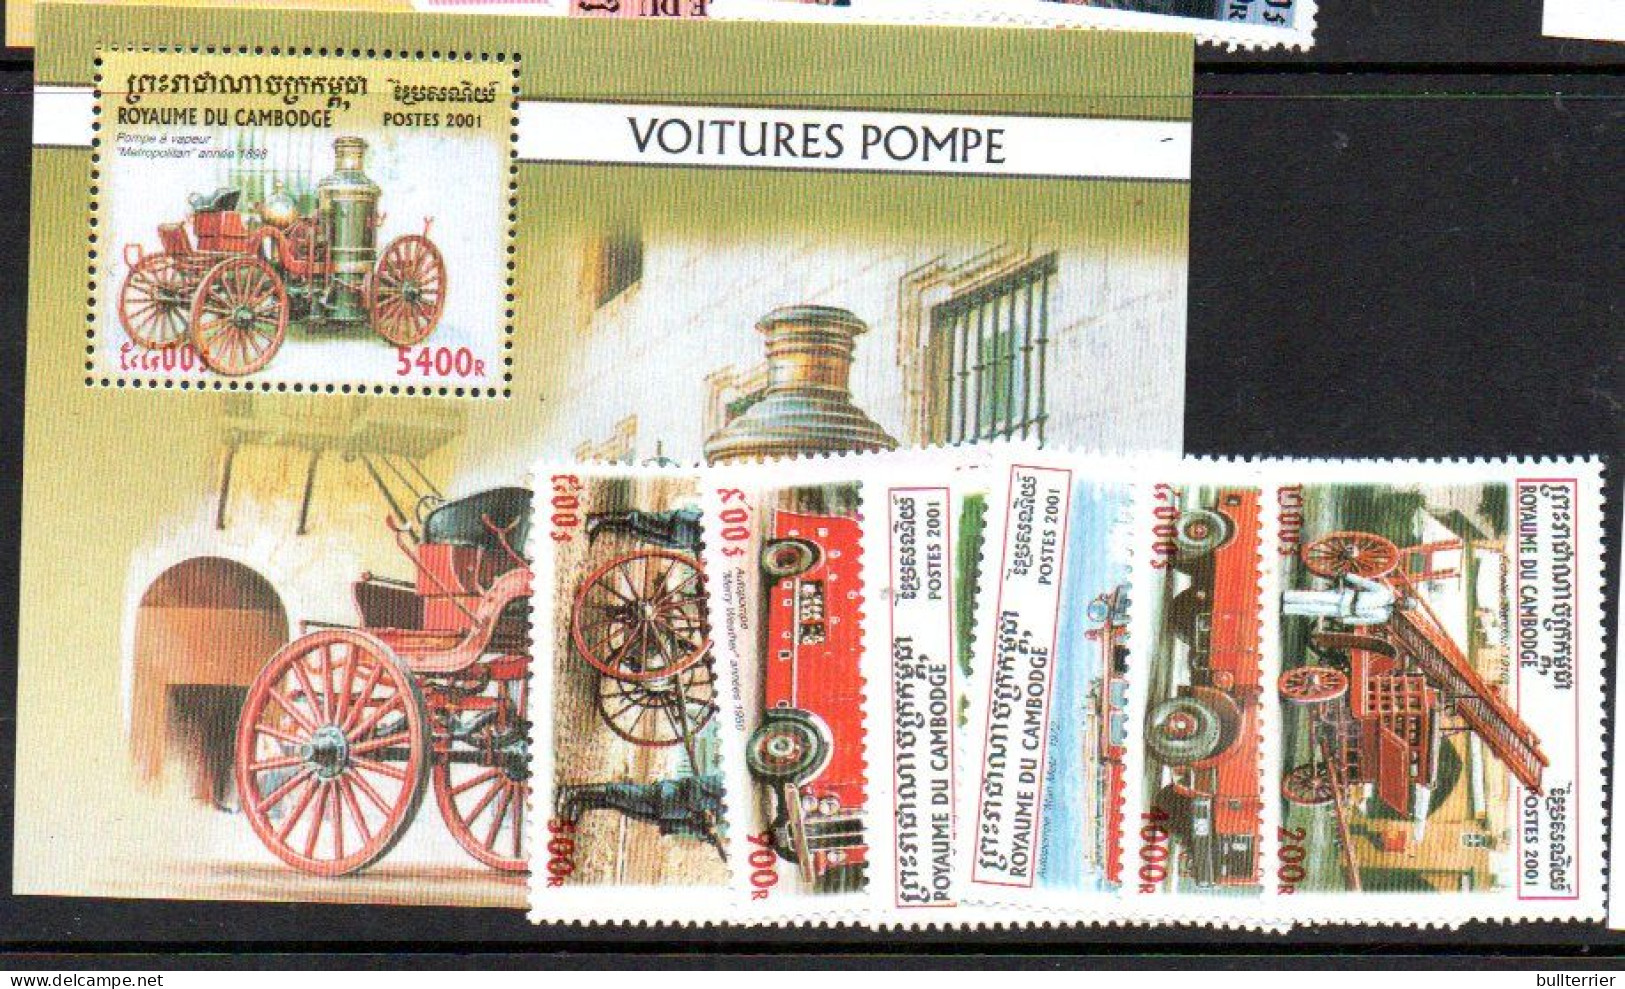 CAMBODIA - 2001- FIRE ENGINES SET OF 6 + SOUVENIR SHEET  MINT NEVER HINGED - Cambodge